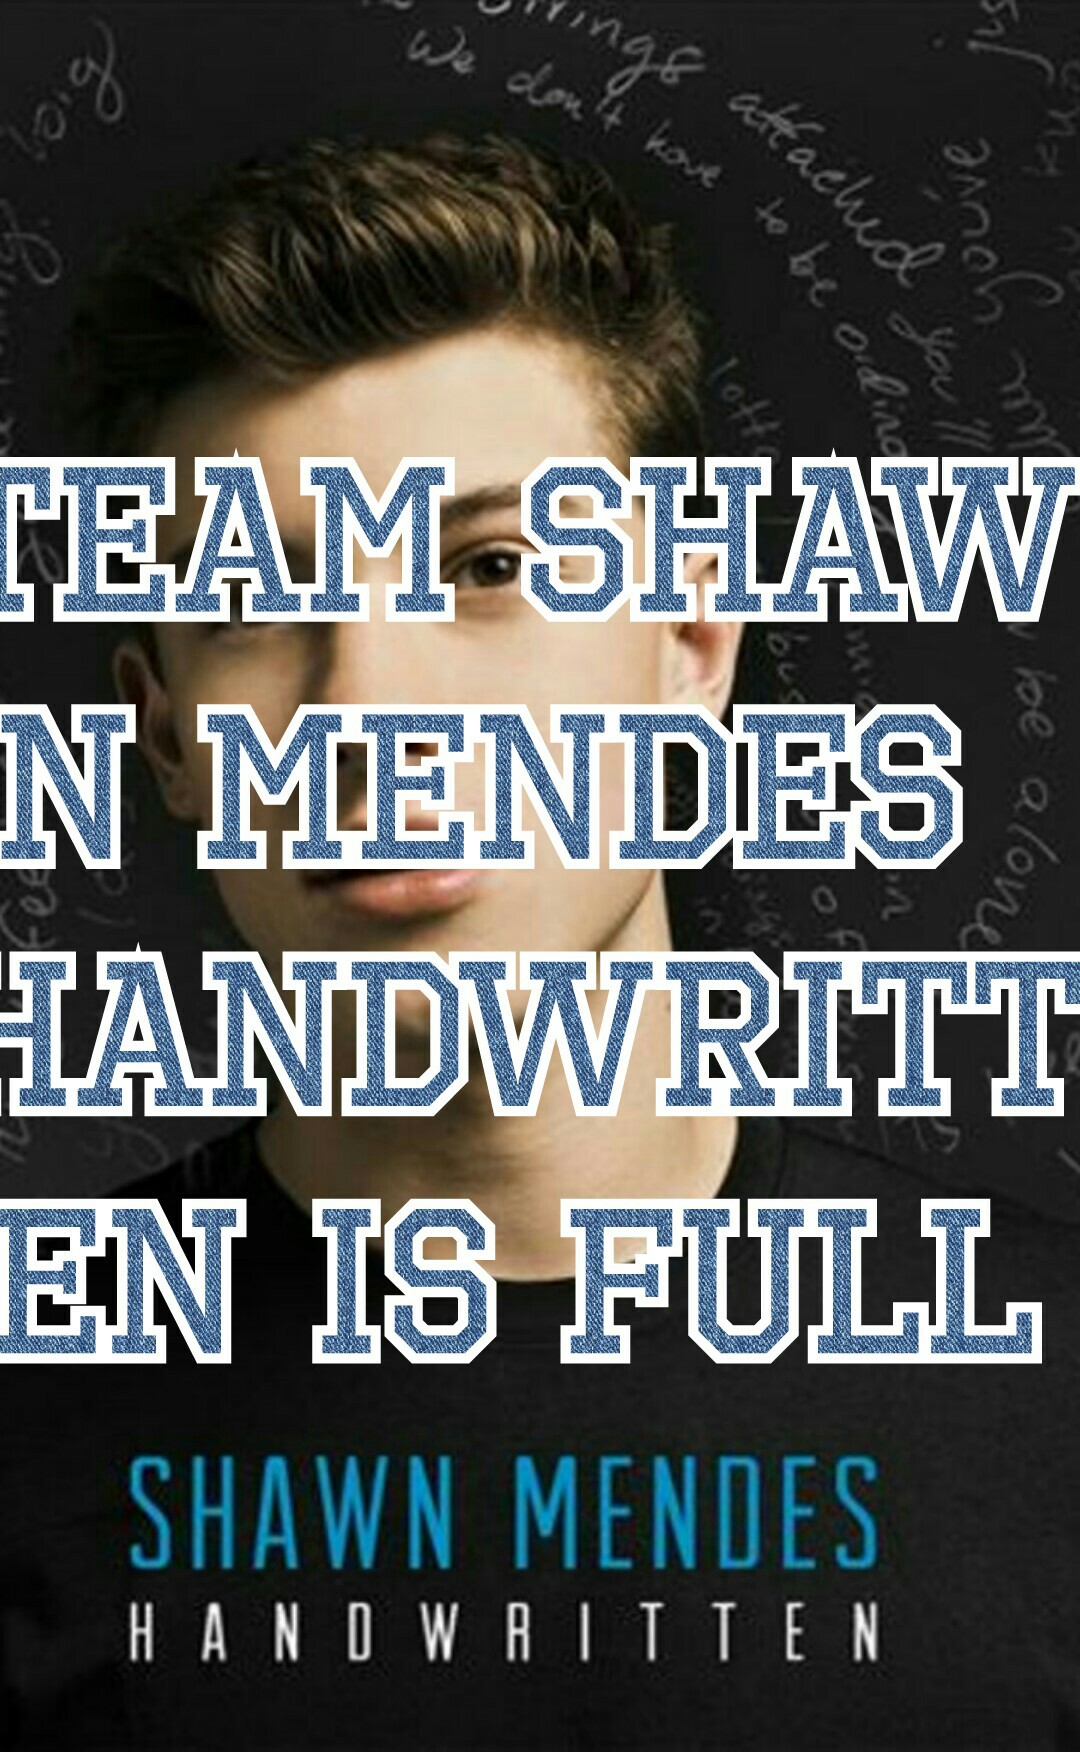 team shawn mendes handwritten and shawn mendes the album are FULL
teams...Shawn mendes illuminate, EP, and unplugged r open